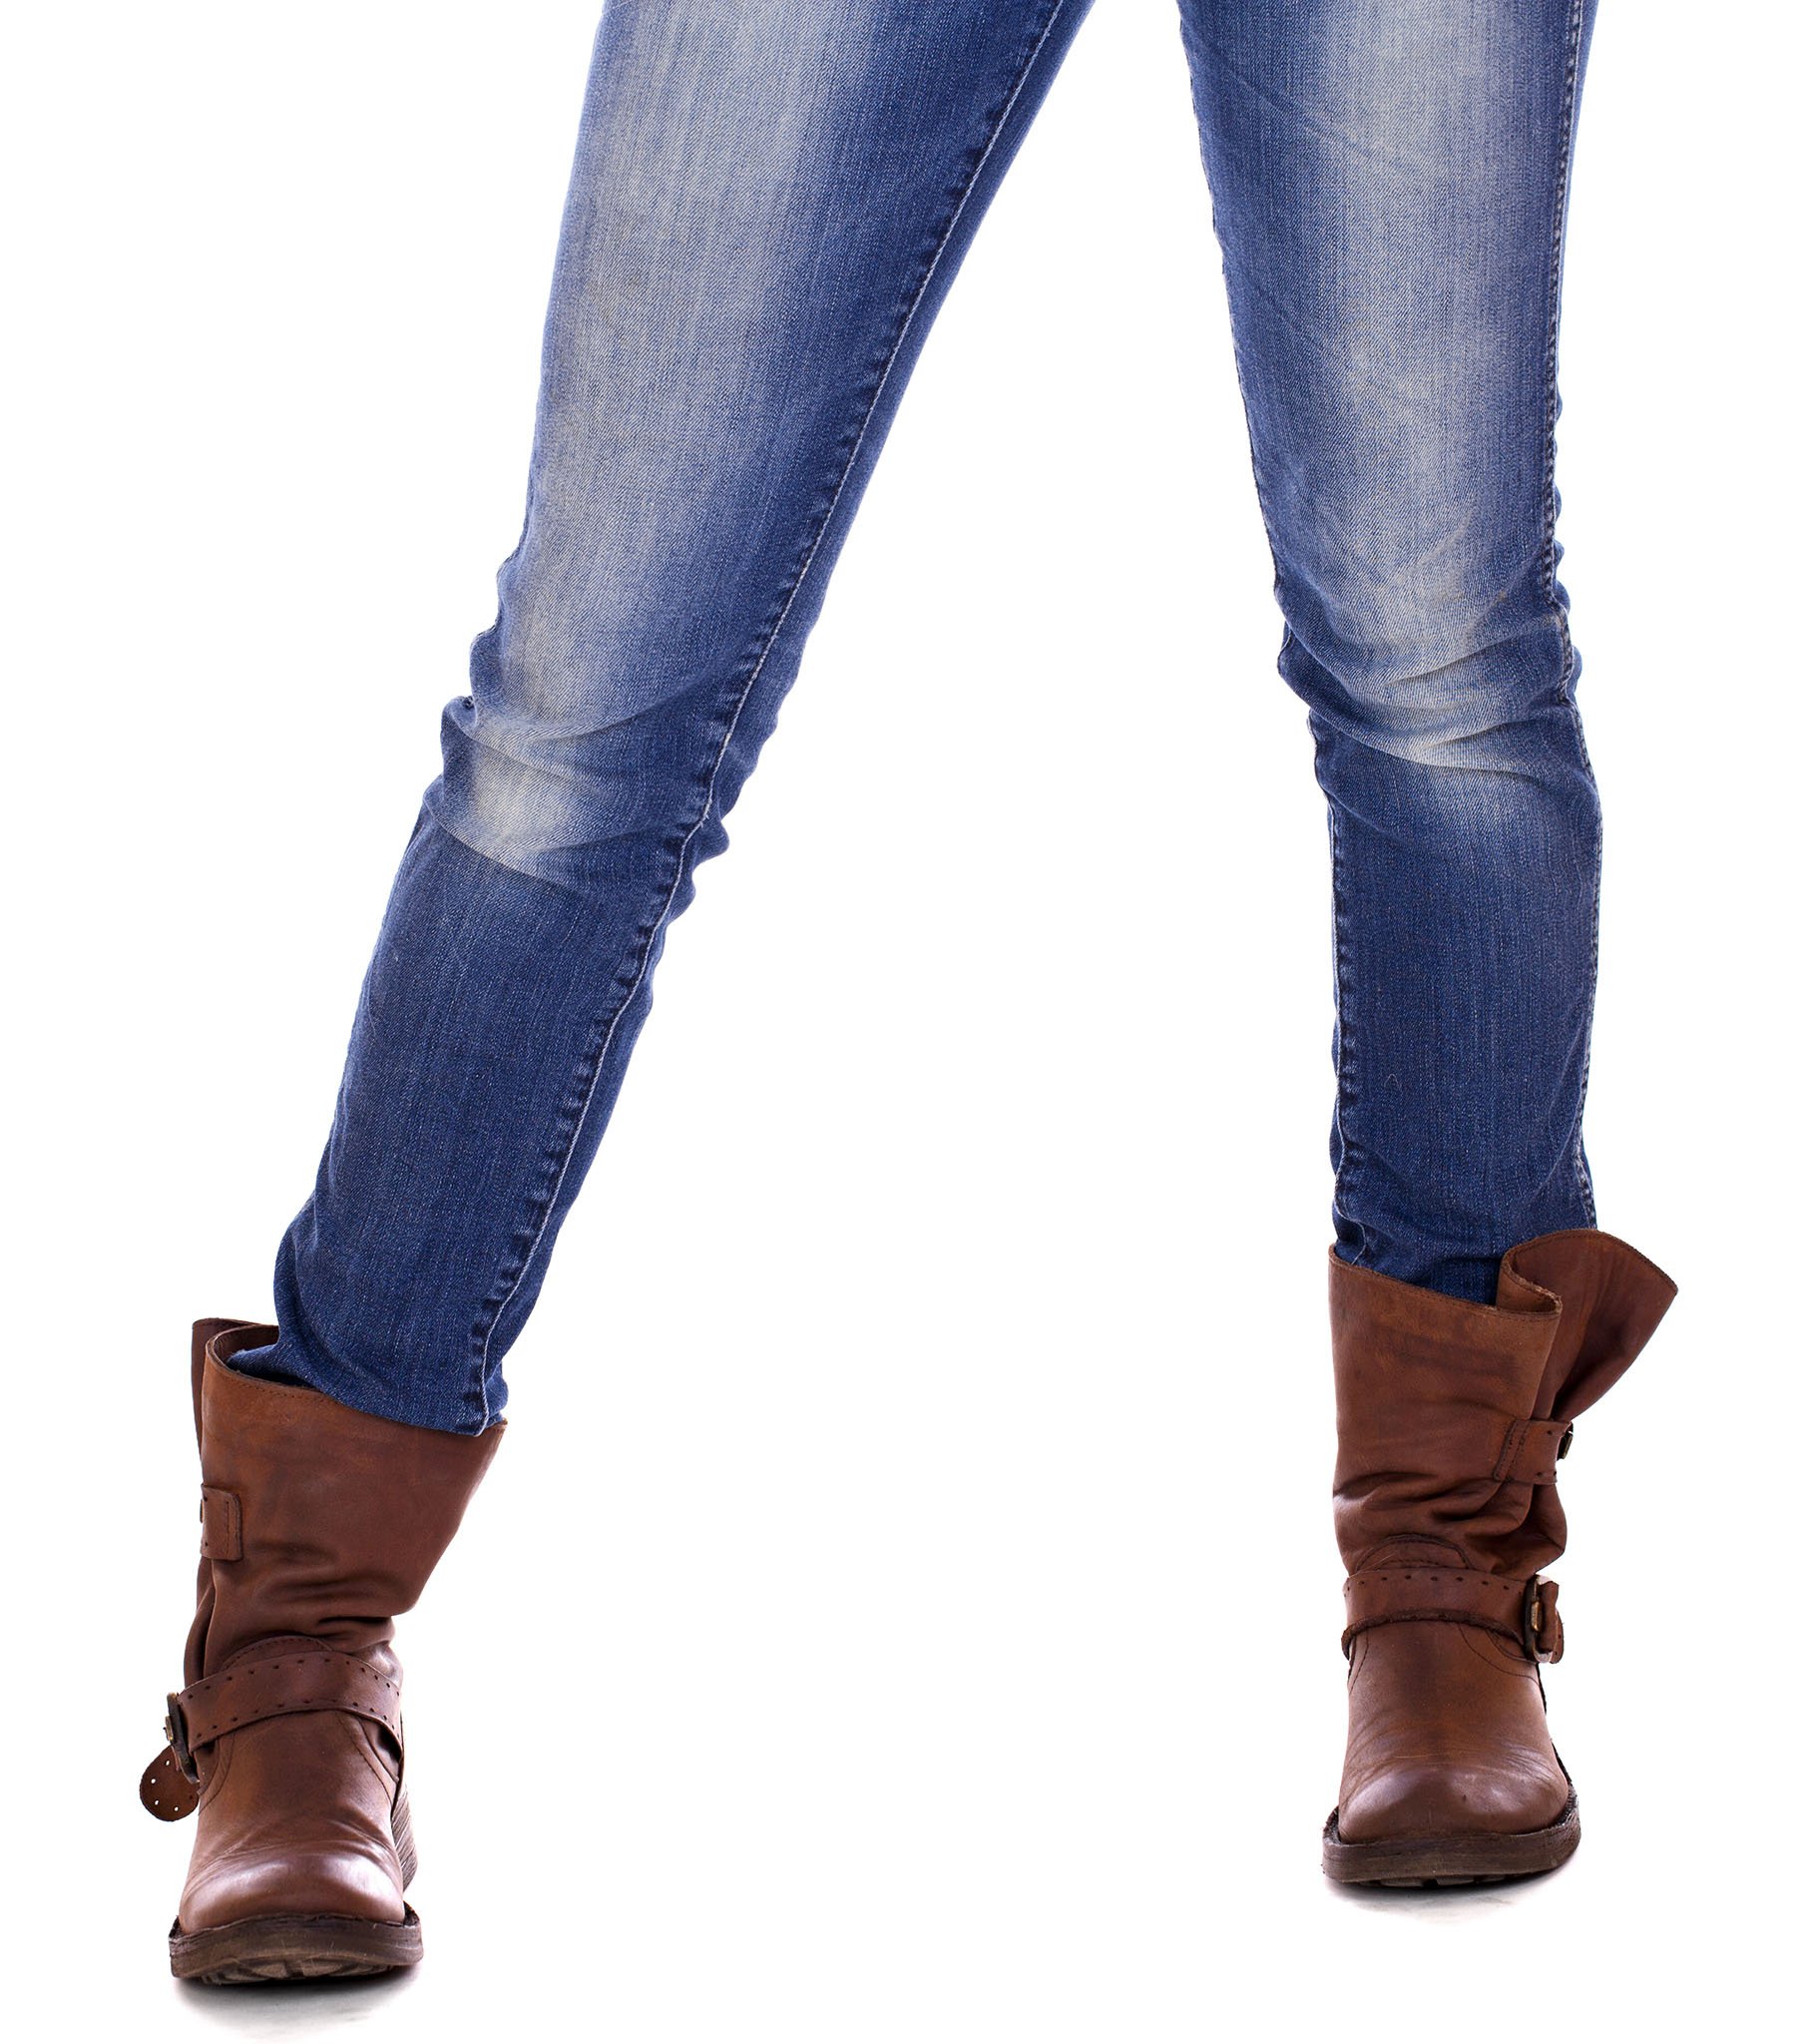 Shorter than thigh-high boots, tall ankle boots are wider in the calf area, allowing you to tuck your jeans into the boots easily